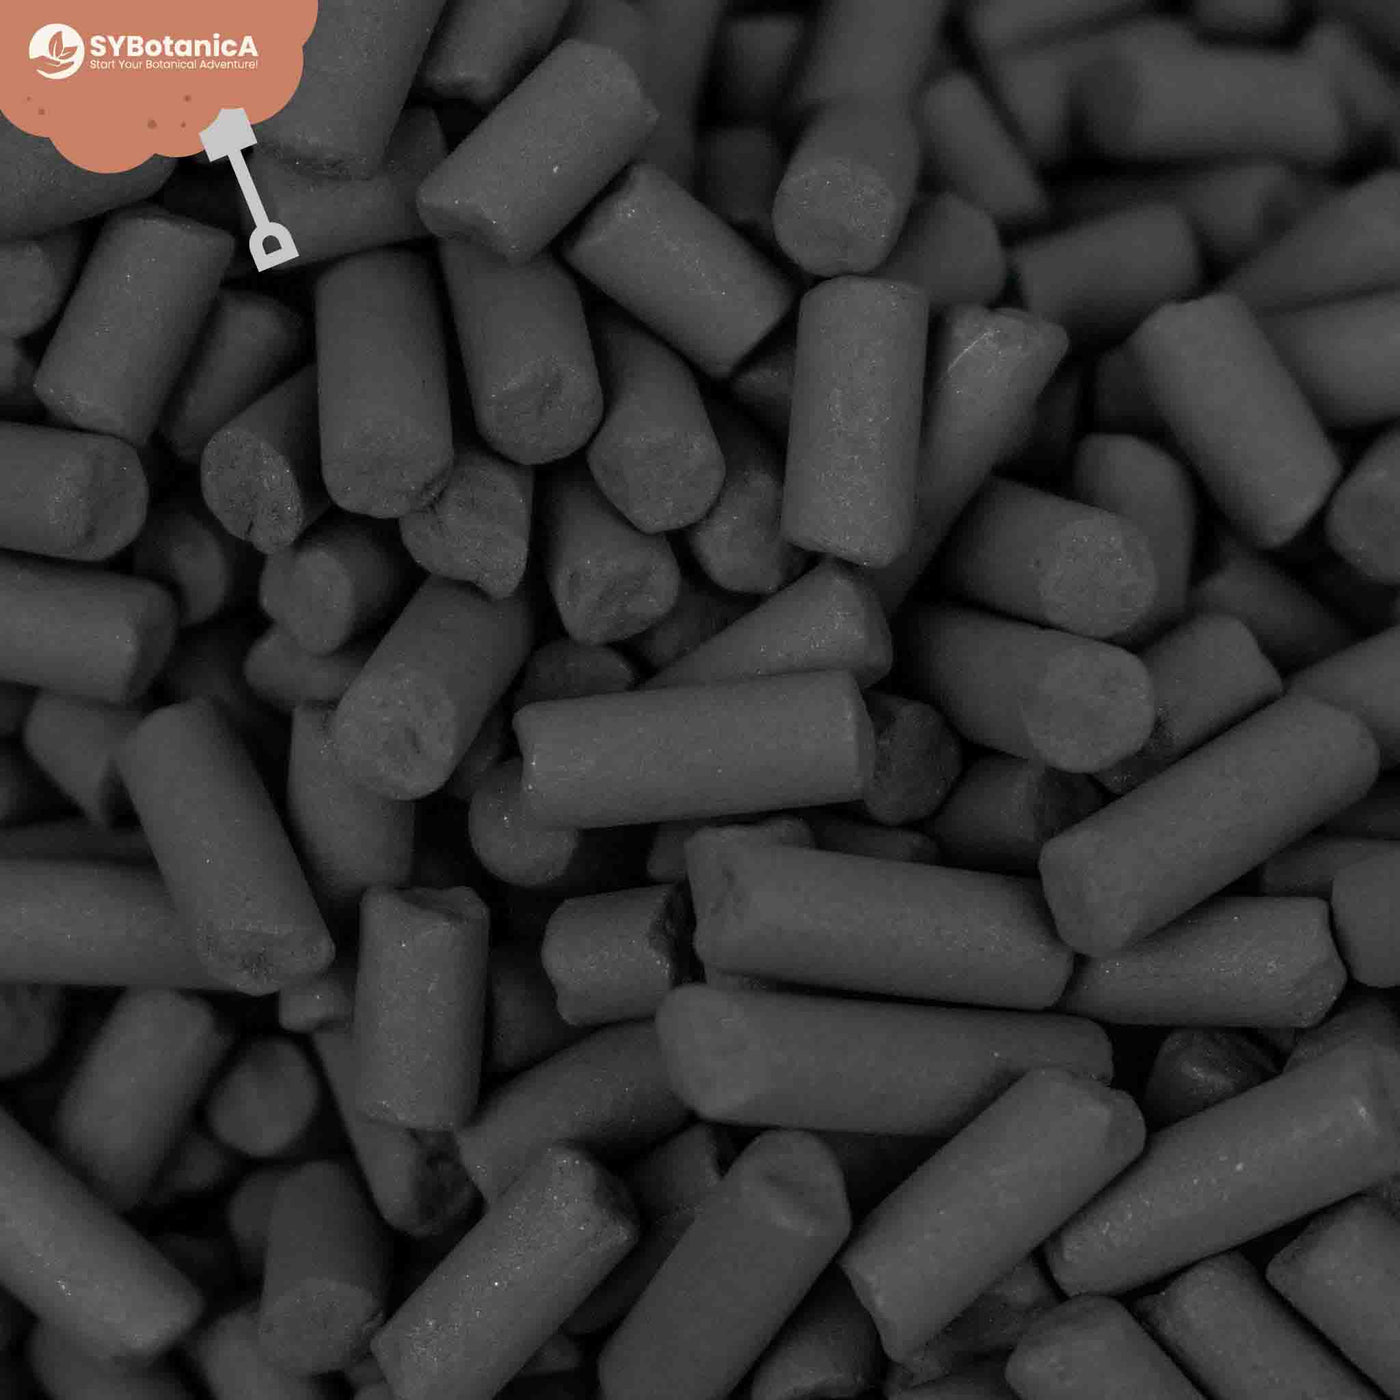 Activated Carbon, What Is Activated Carbon?